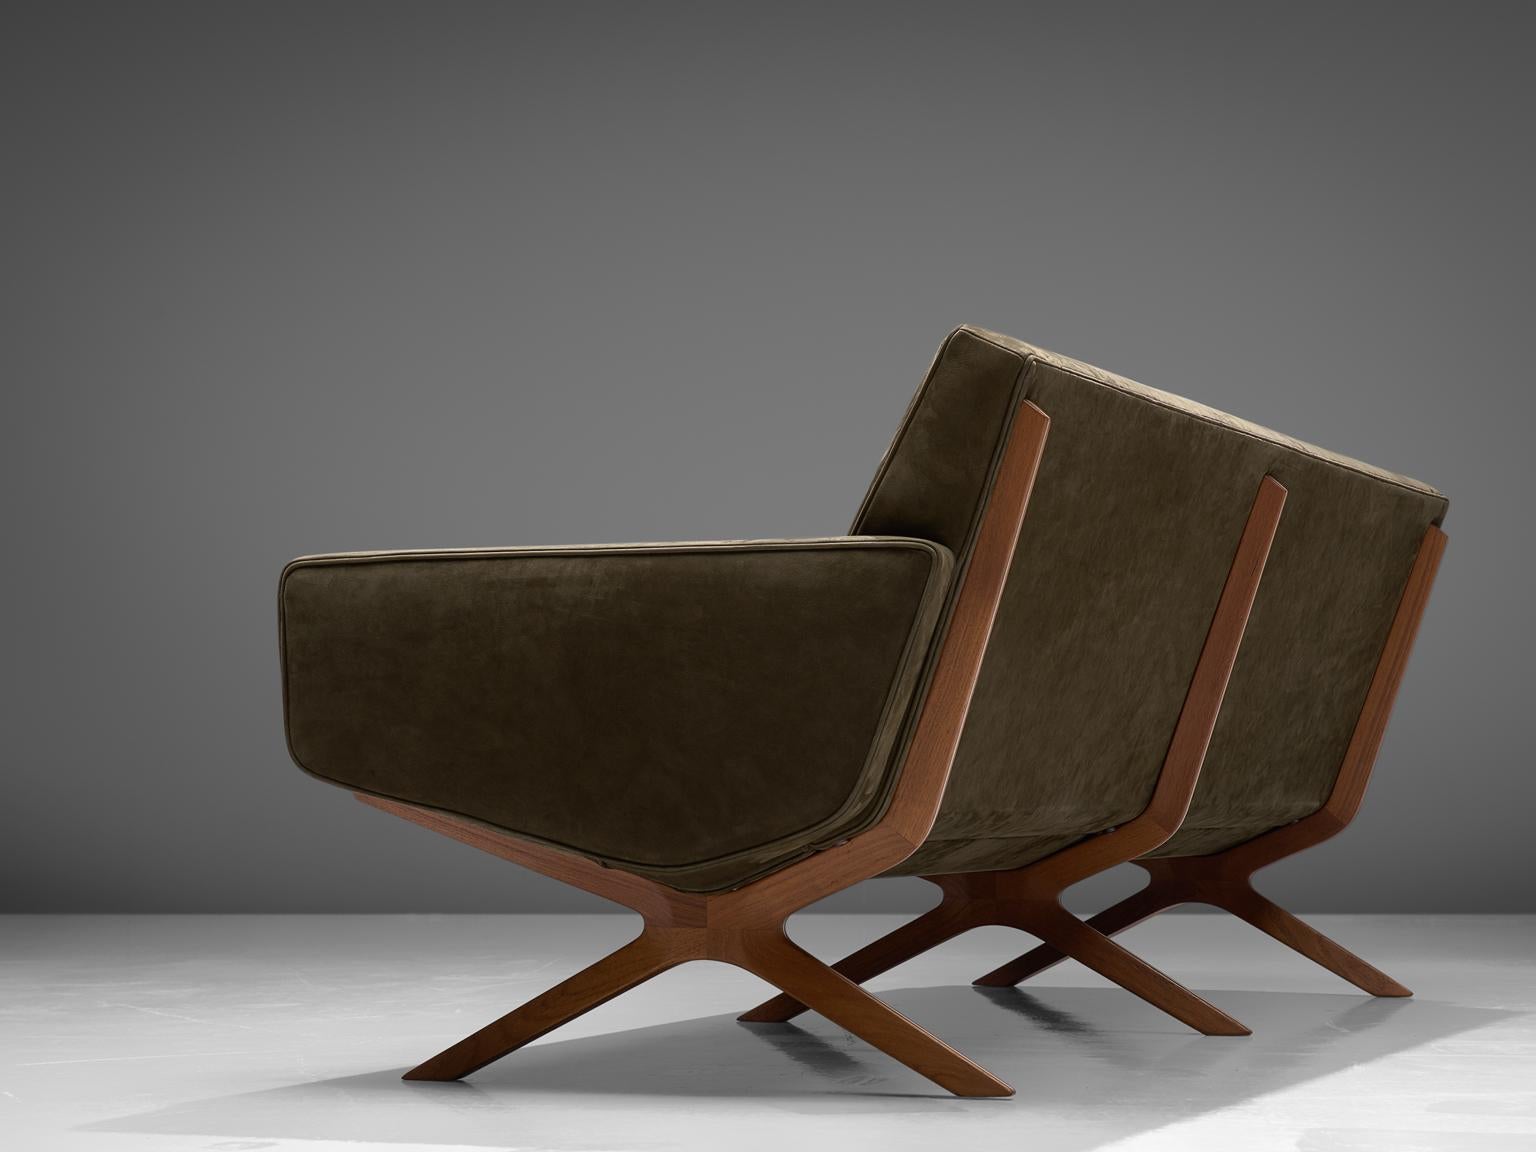 Peter Hvidt & Orla Mølgaard Nielsen, Silverline three-seat sofa, leather, teak and metal, 1950s.

Comfortable sofa with an architectural design by Hvidt & Mølgaard. This model is called silverline, due to its aesthetic metal line in the expressive